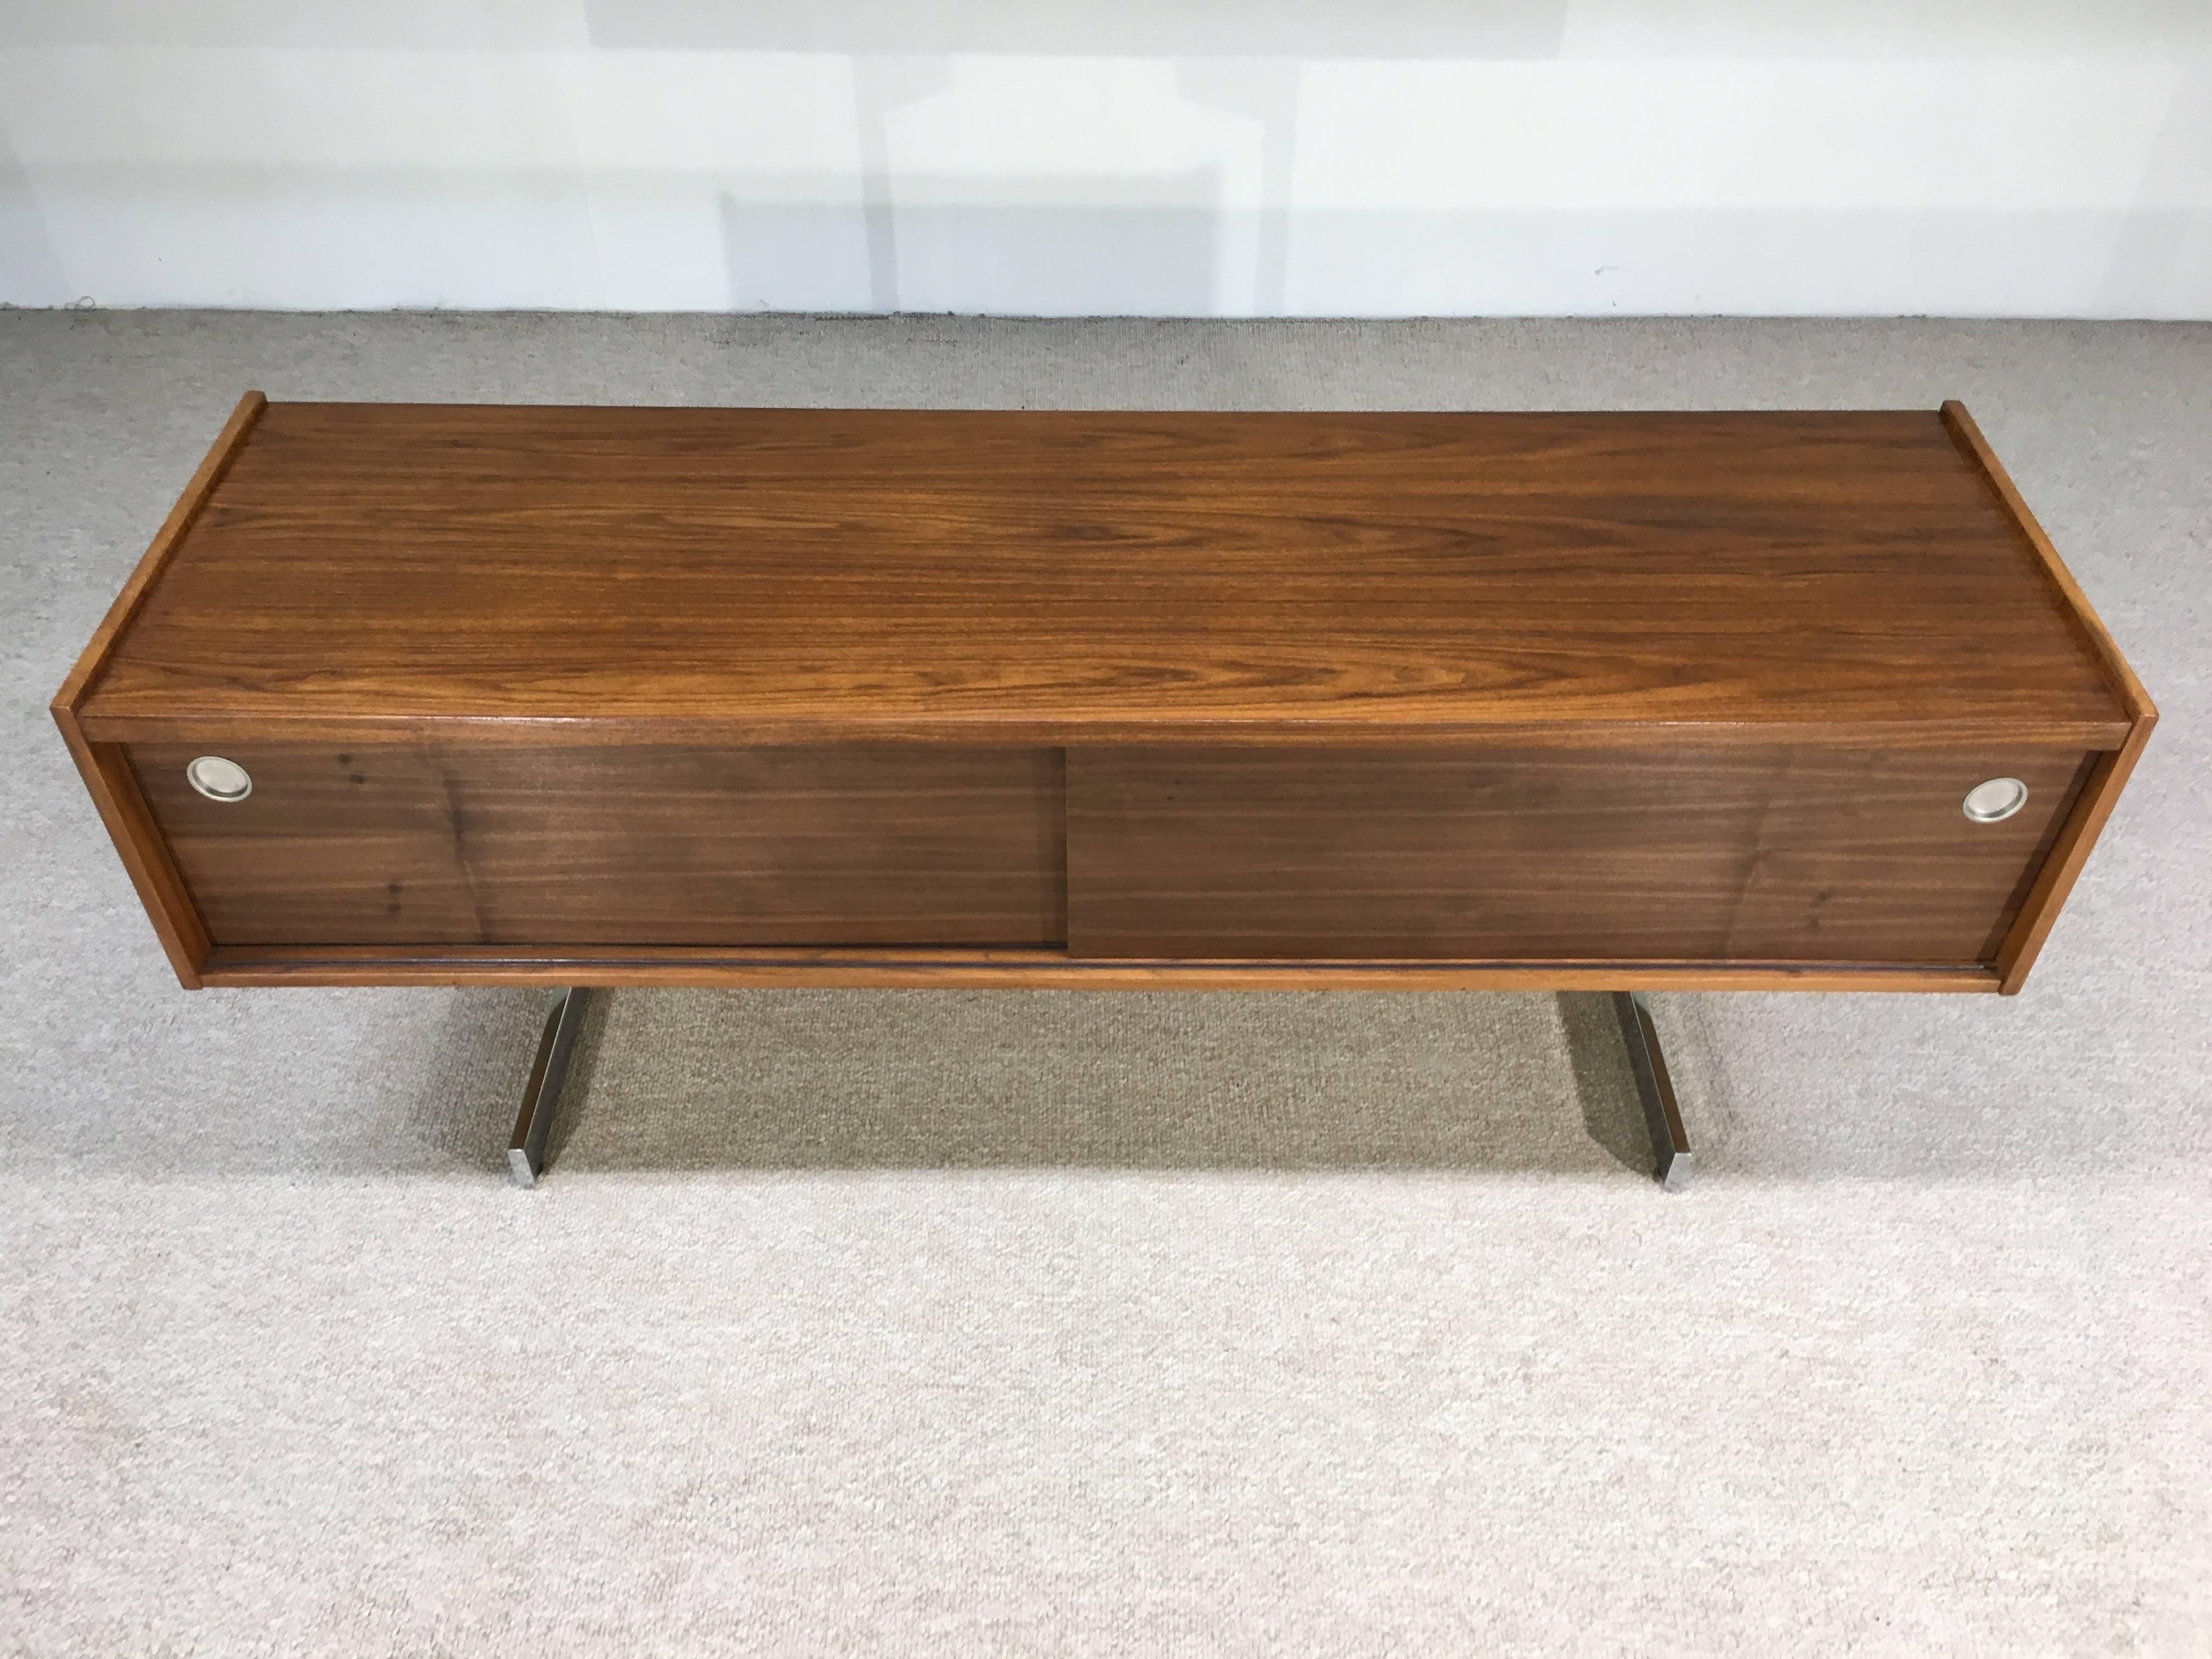 A very attractive and rare cantilever credenza by Opus having walnut cabinet and interior that stands on chrome cantilever legs. Ample storage including three drawers, cabinet space and a file drawer.